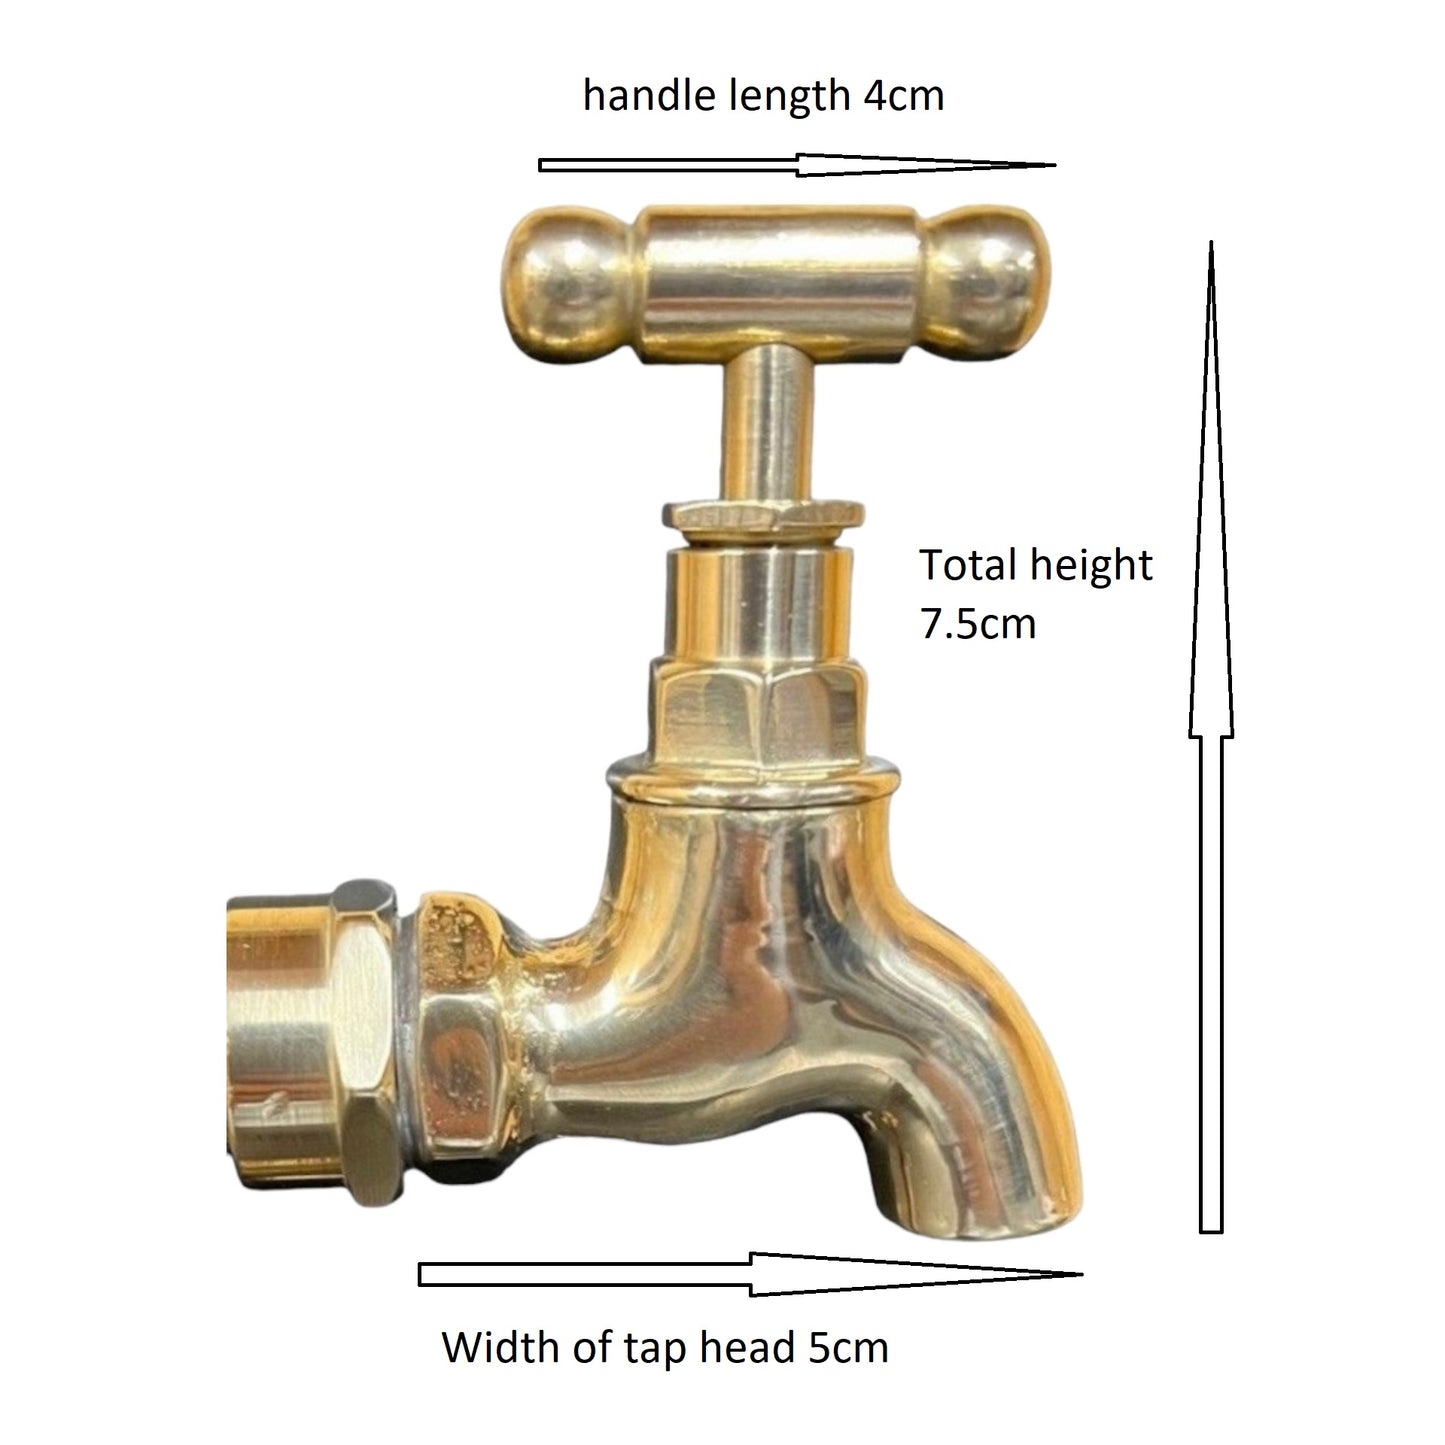 tap head of copper and brass vintage style taps sold by All Things French Store